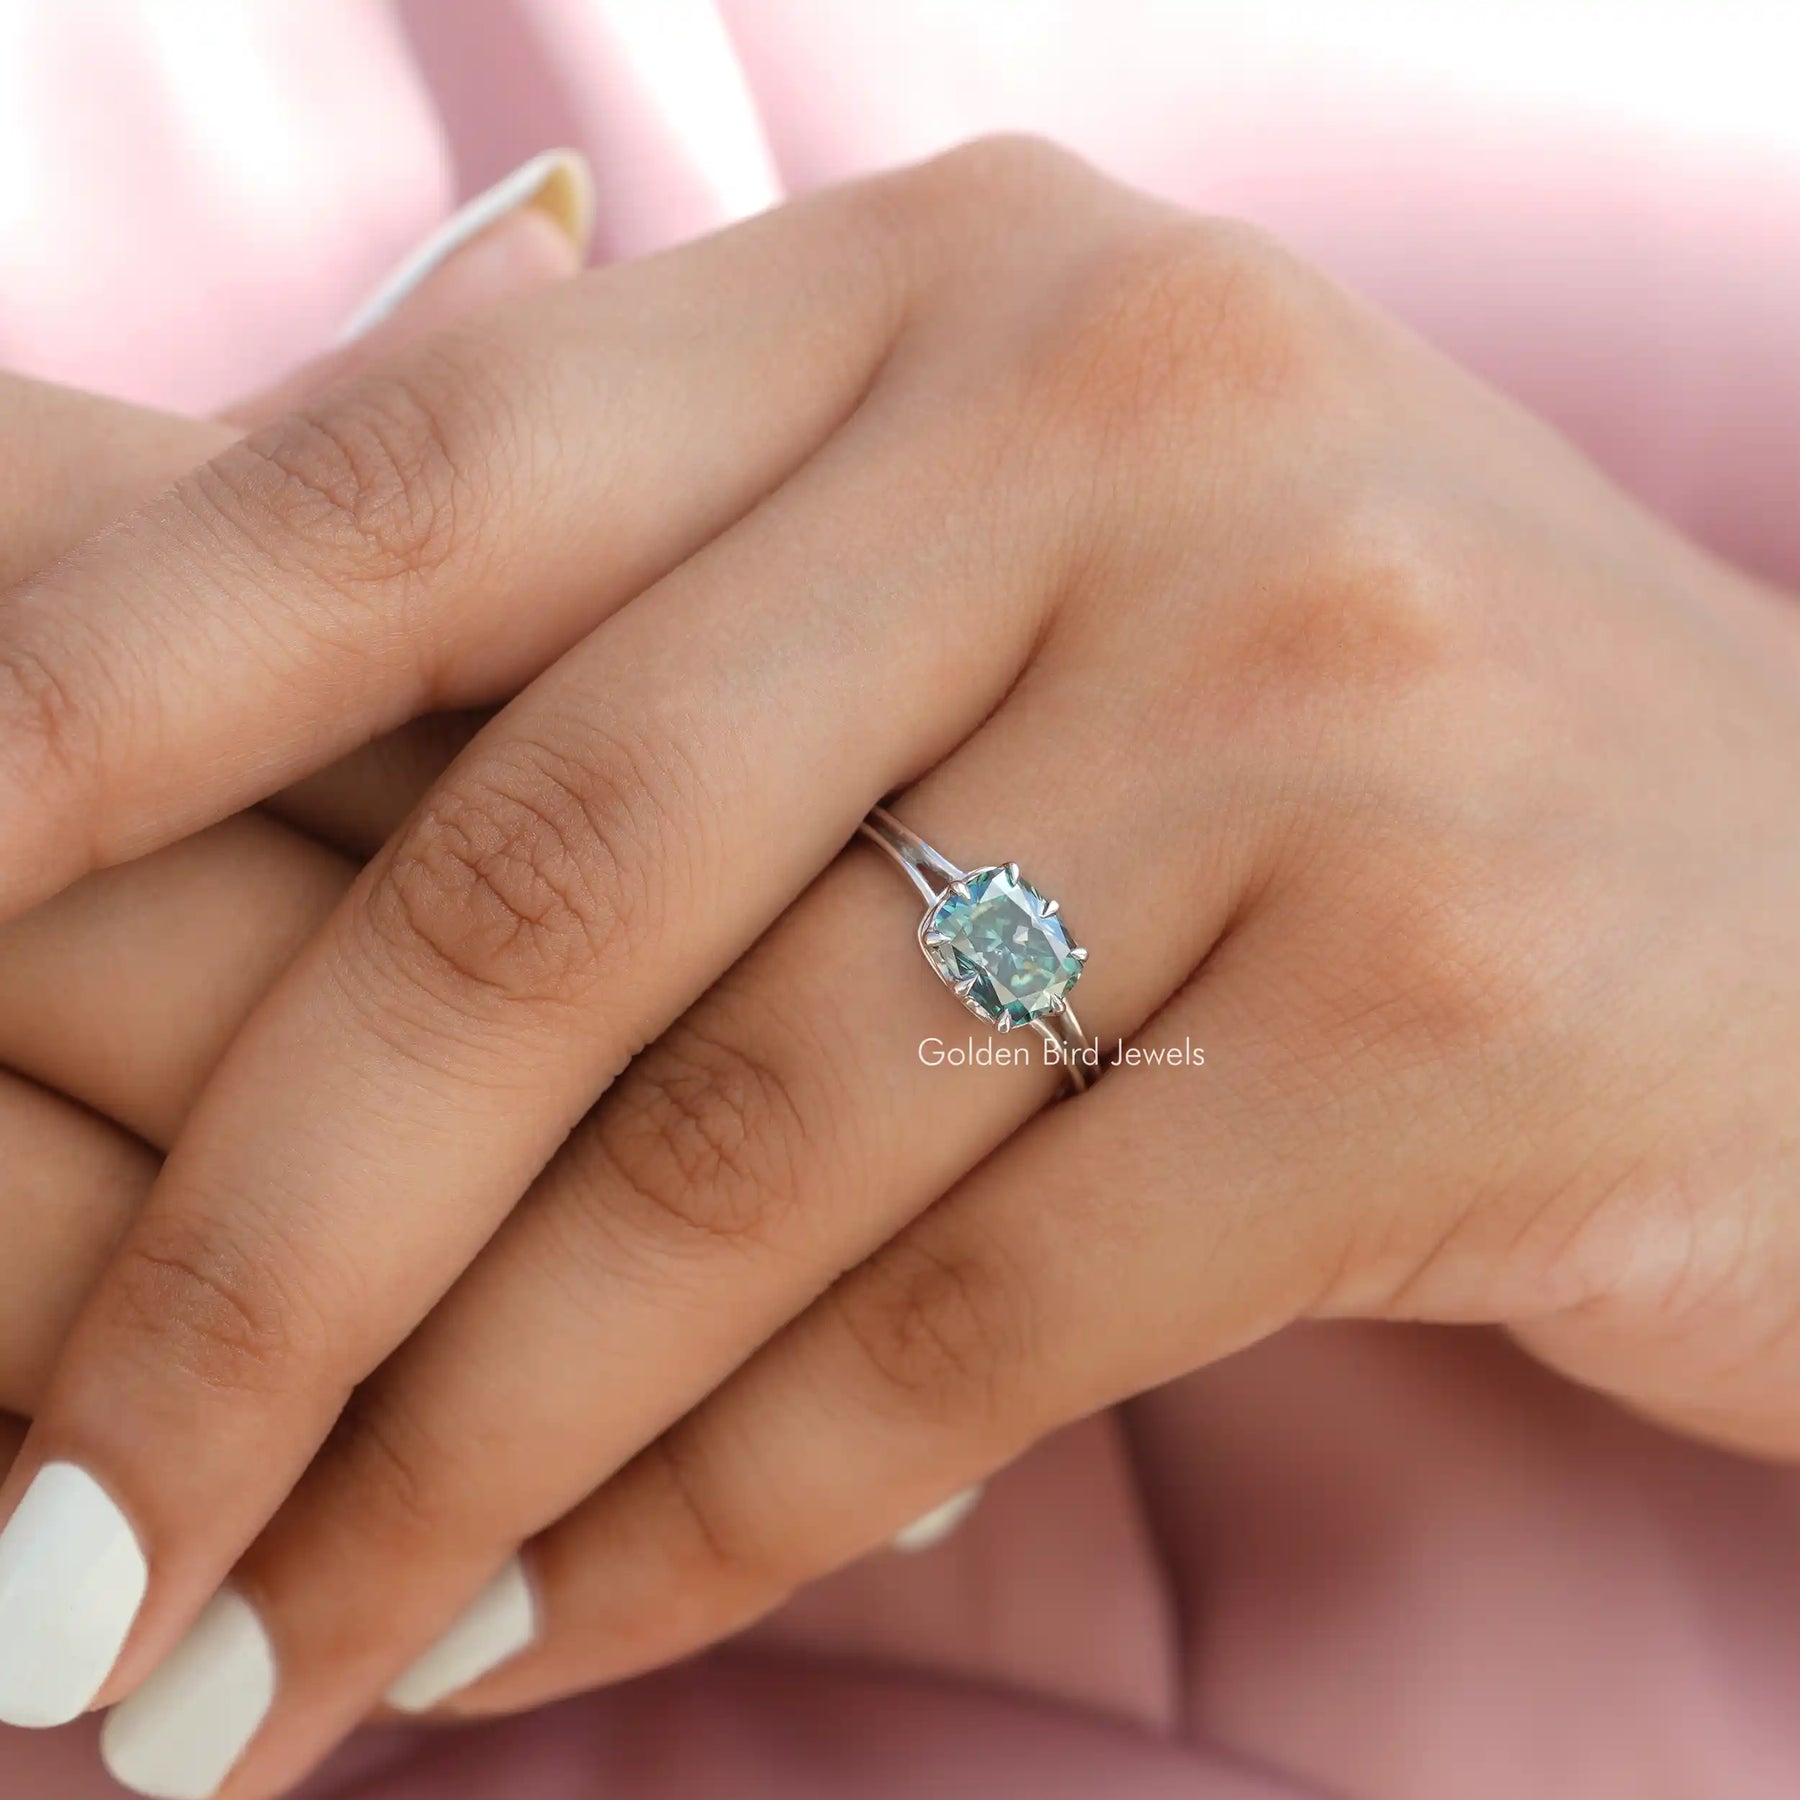 [In Finger a Cushion Cut Moissanite Engagement Ring In Claw Prong Setting]-[Golden Bird Jewels]